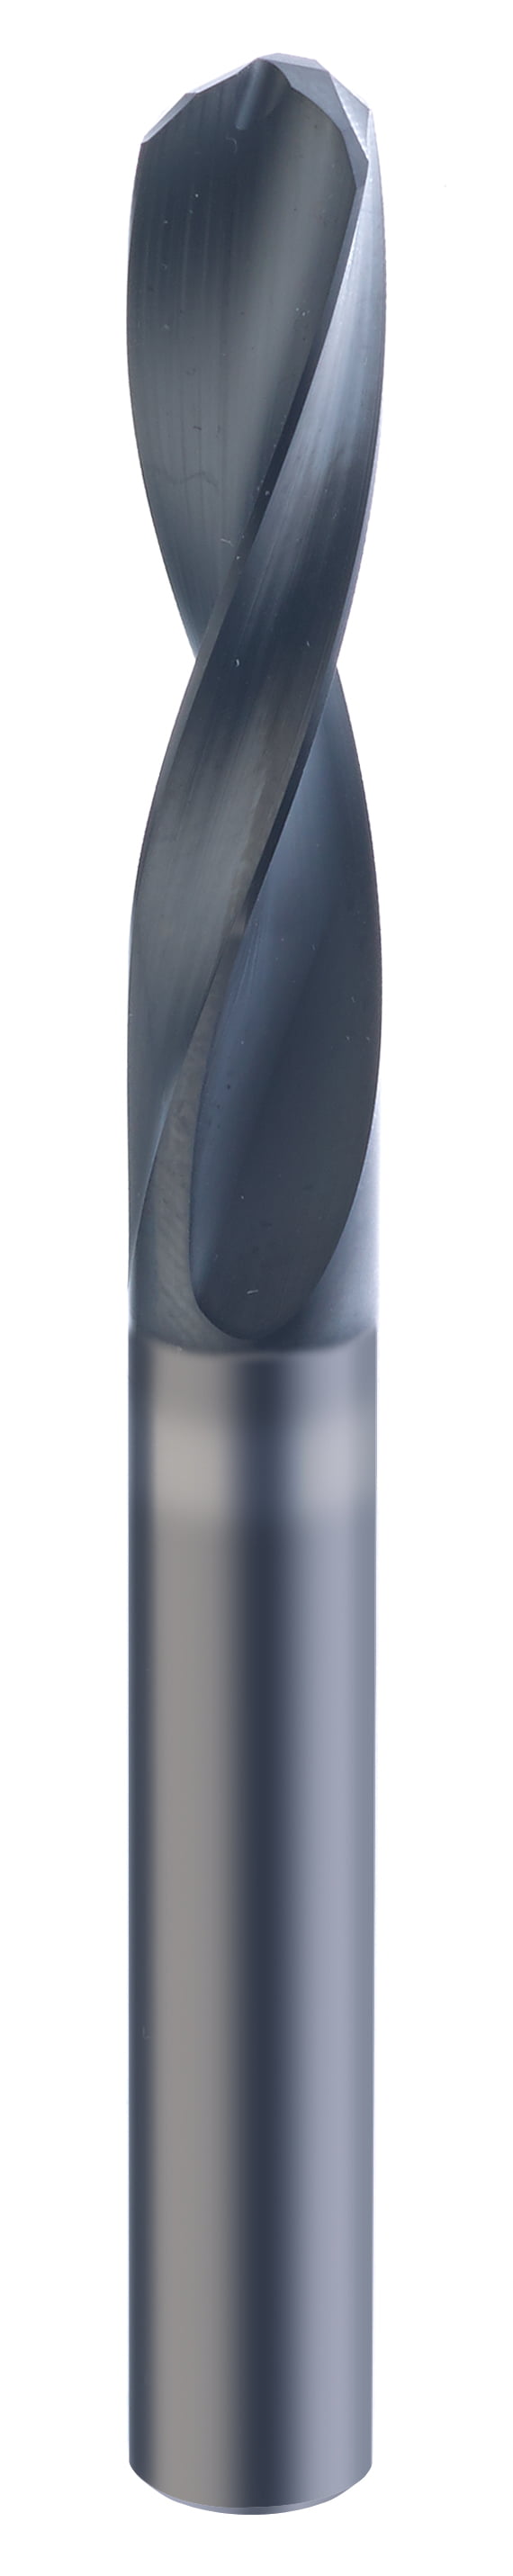 4.10mm Dia, 145 Degree Point, Solid Carbide Drill - 50009